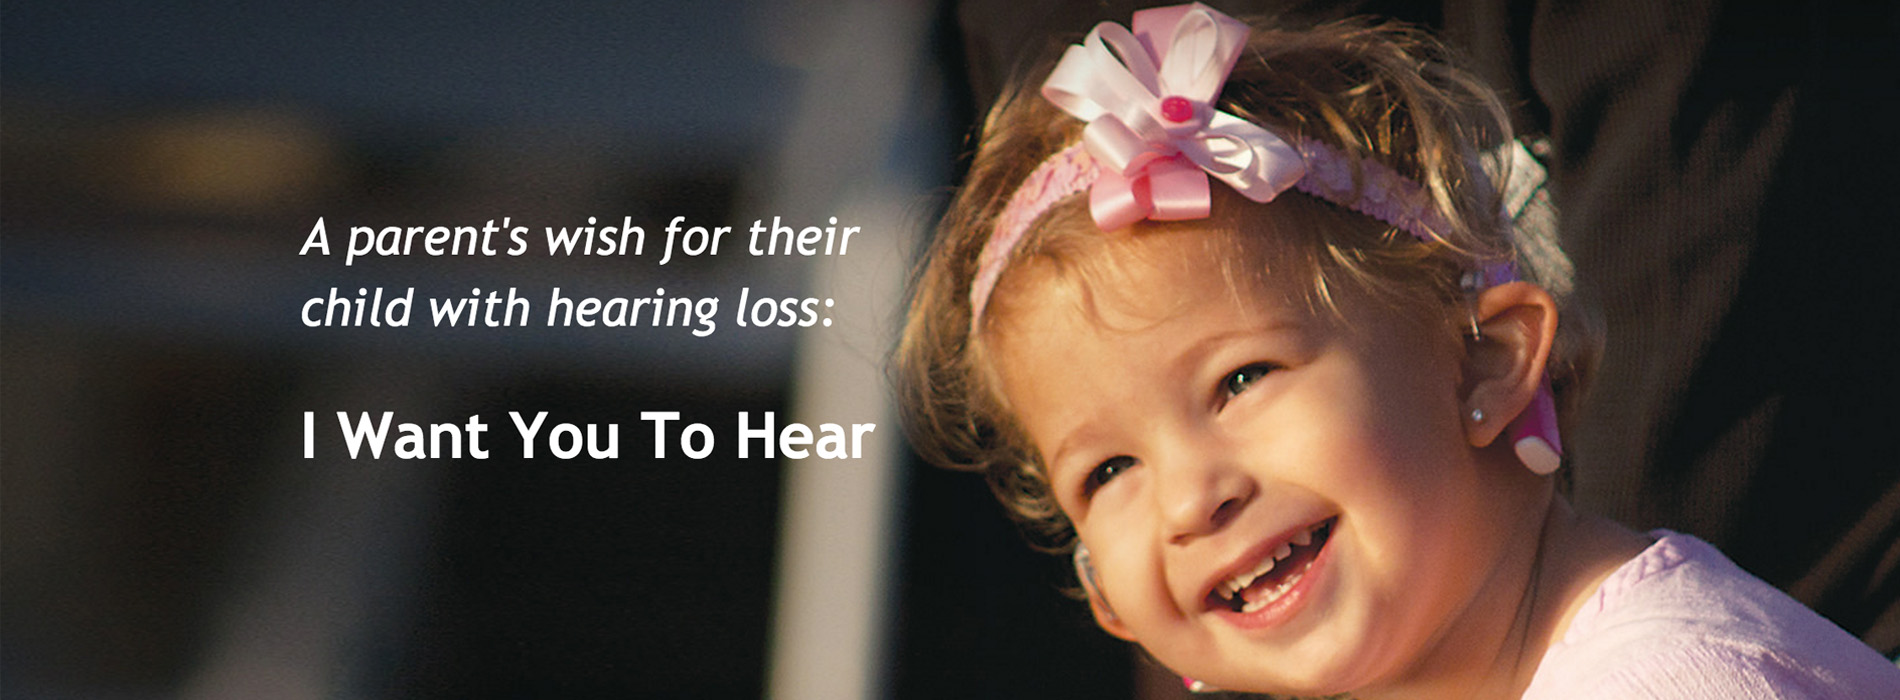 Cochlear's IWantYouToHear.com is a new online resource to help parents of a child with hearing loss.